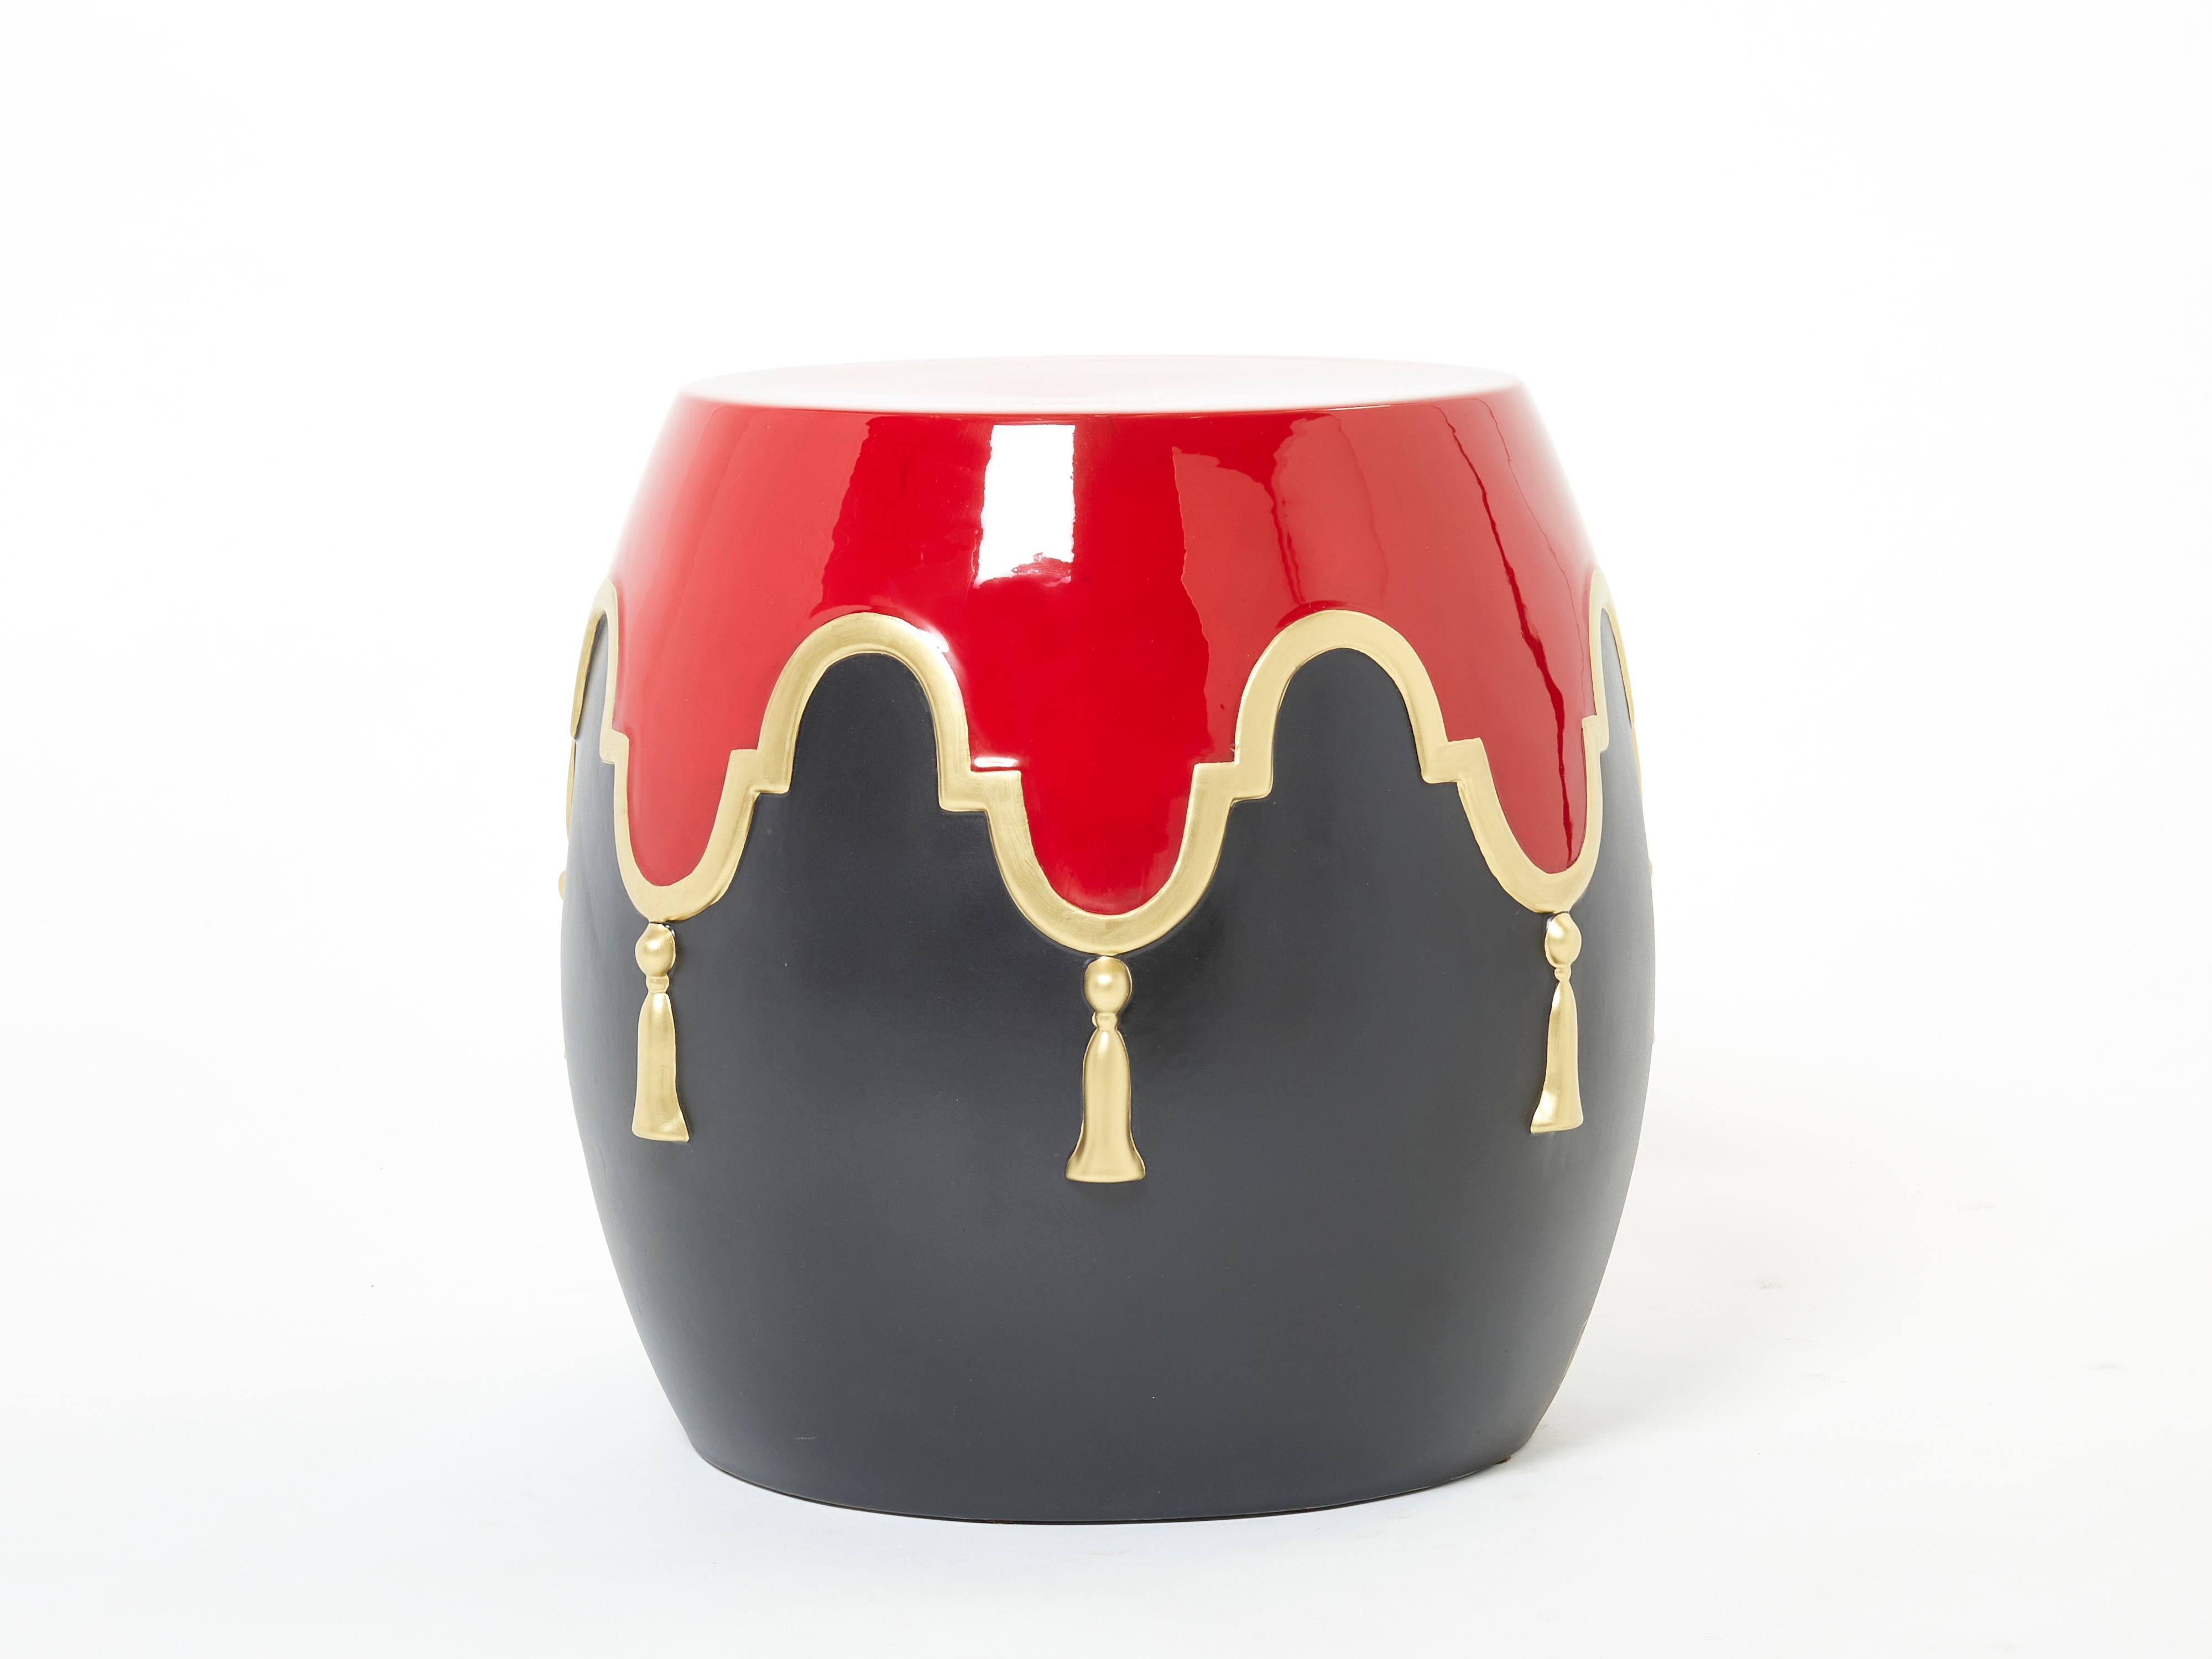 This rare ceramic stool or side table, named Louis XIV for obvious reasons, is clearly a statement piece, especially for those that believe passionate expressions of creativity and baroque go hand-in-hand with interior design. This table made of